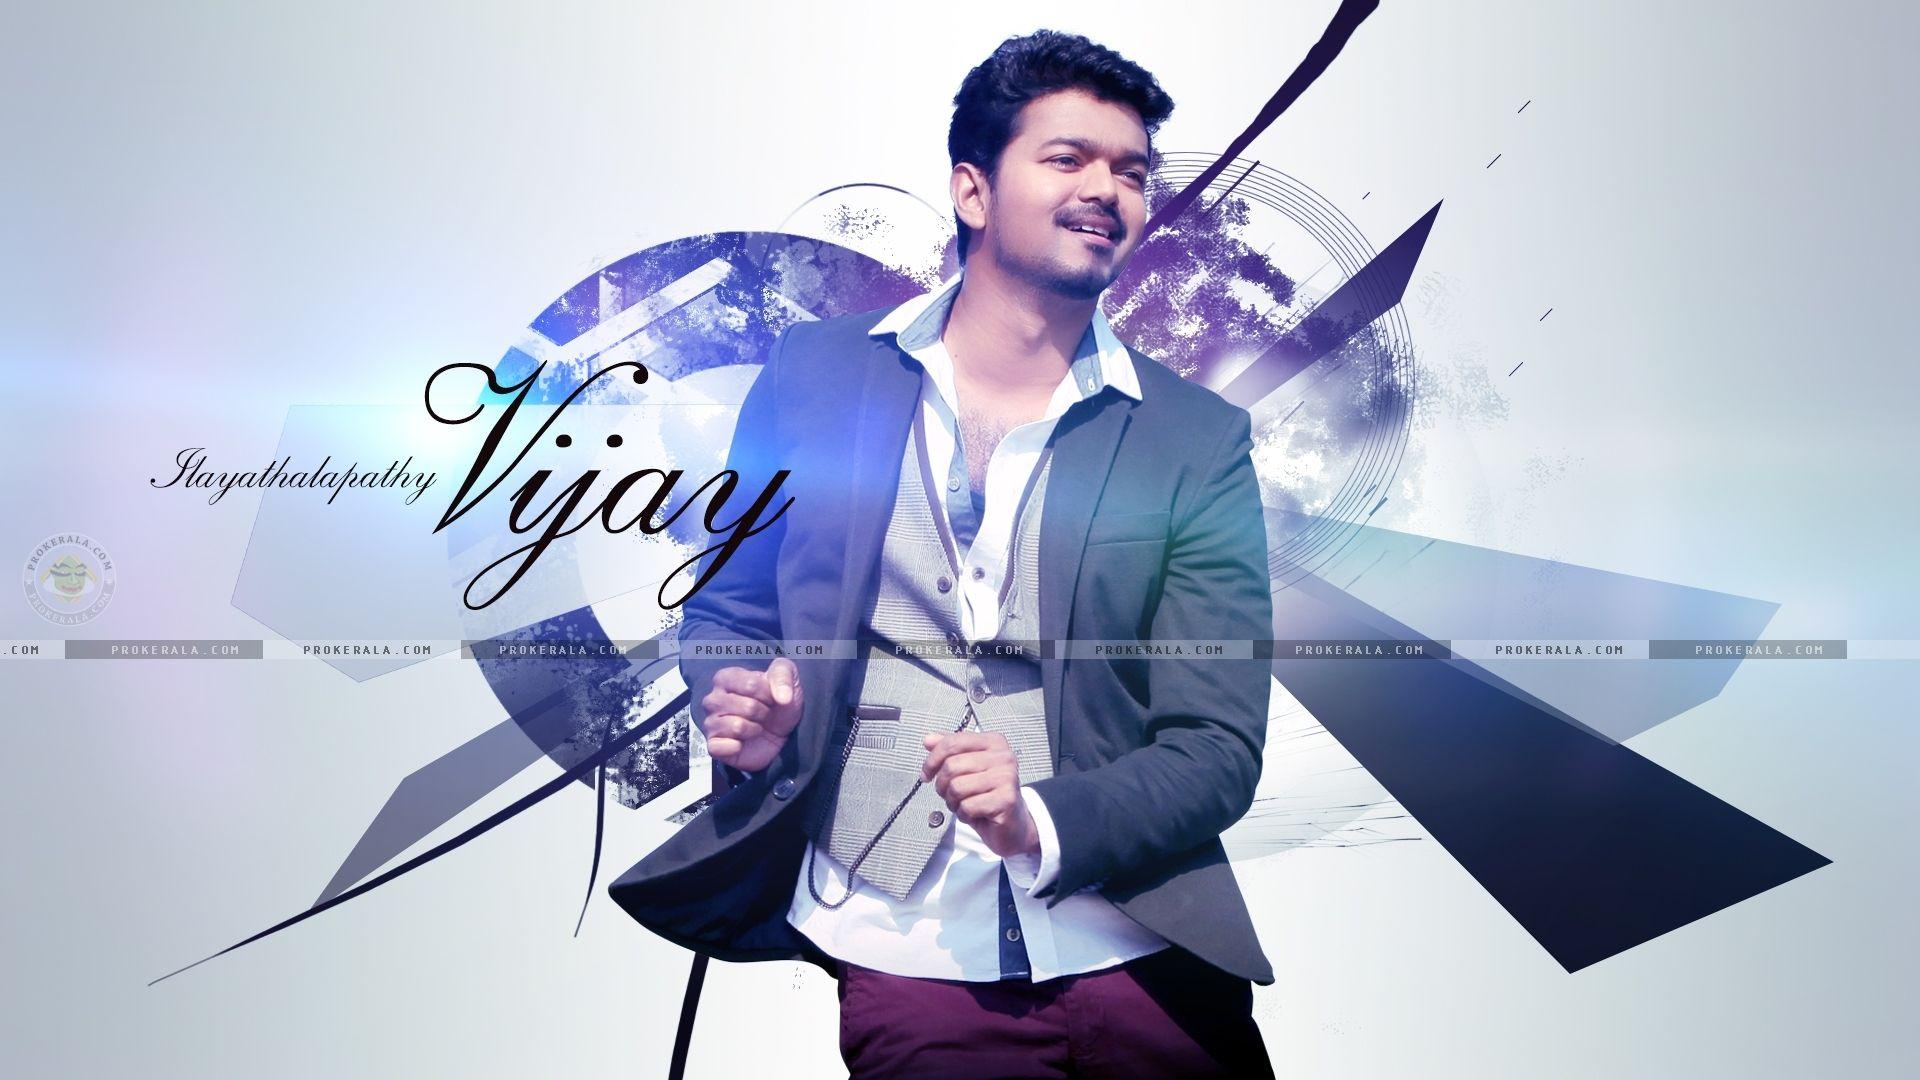 Vijay Hd 4k Wallpapers Top Free Vijay Hd 4k Backgrounds Wallpaperaccess Our list includes adorable wallpapers, nature, tech, abstract art, and 9. vijay hd 4k wallpapers top free vijay